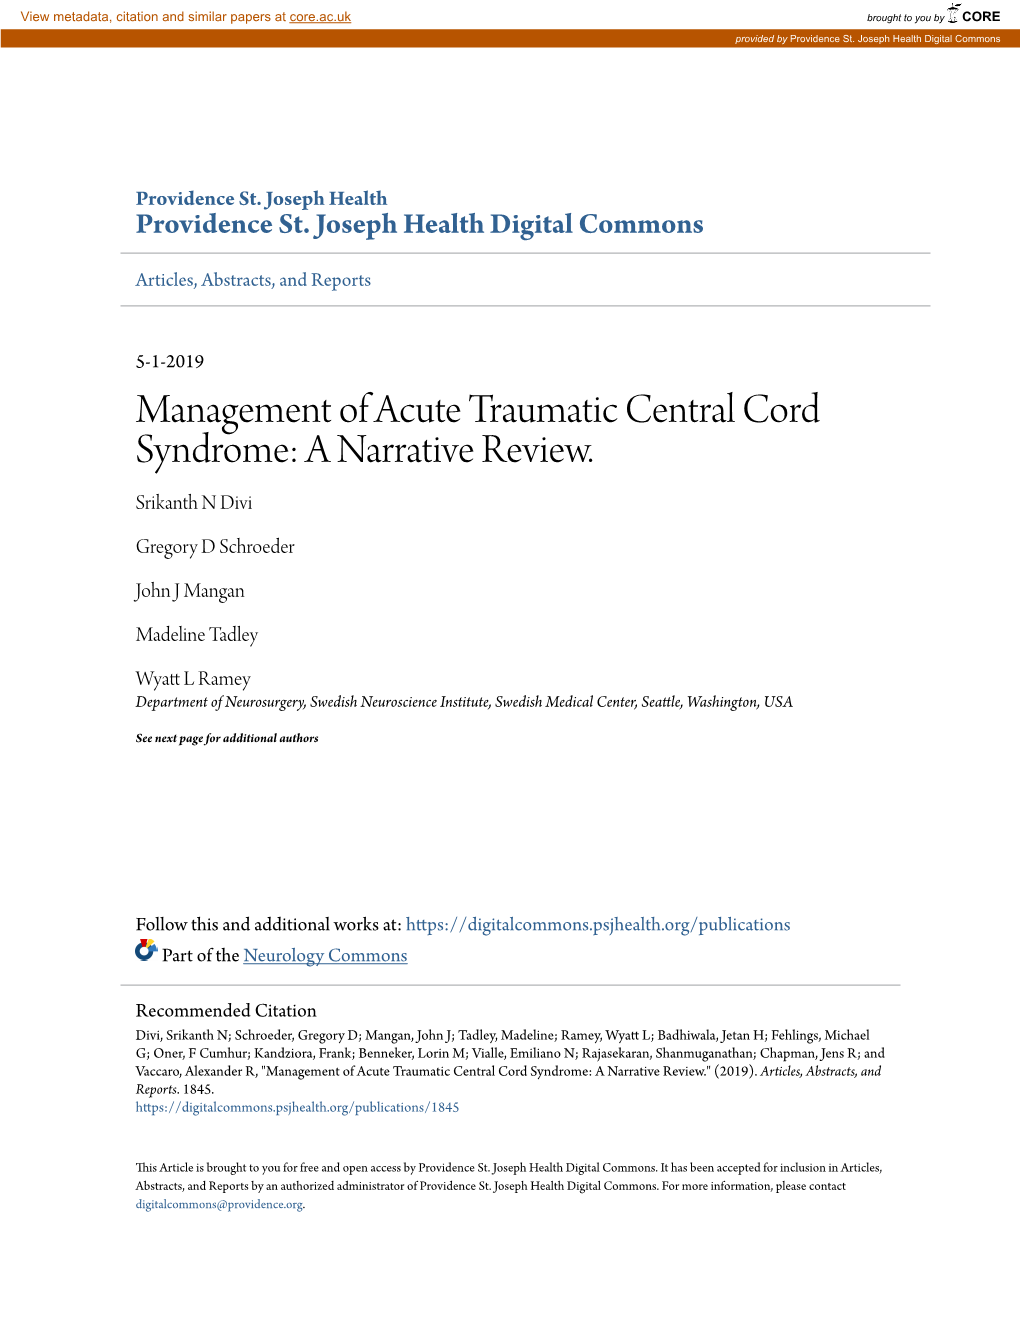 Management of Acute Traumatic Central Cord Syndrome: a Narrative Review